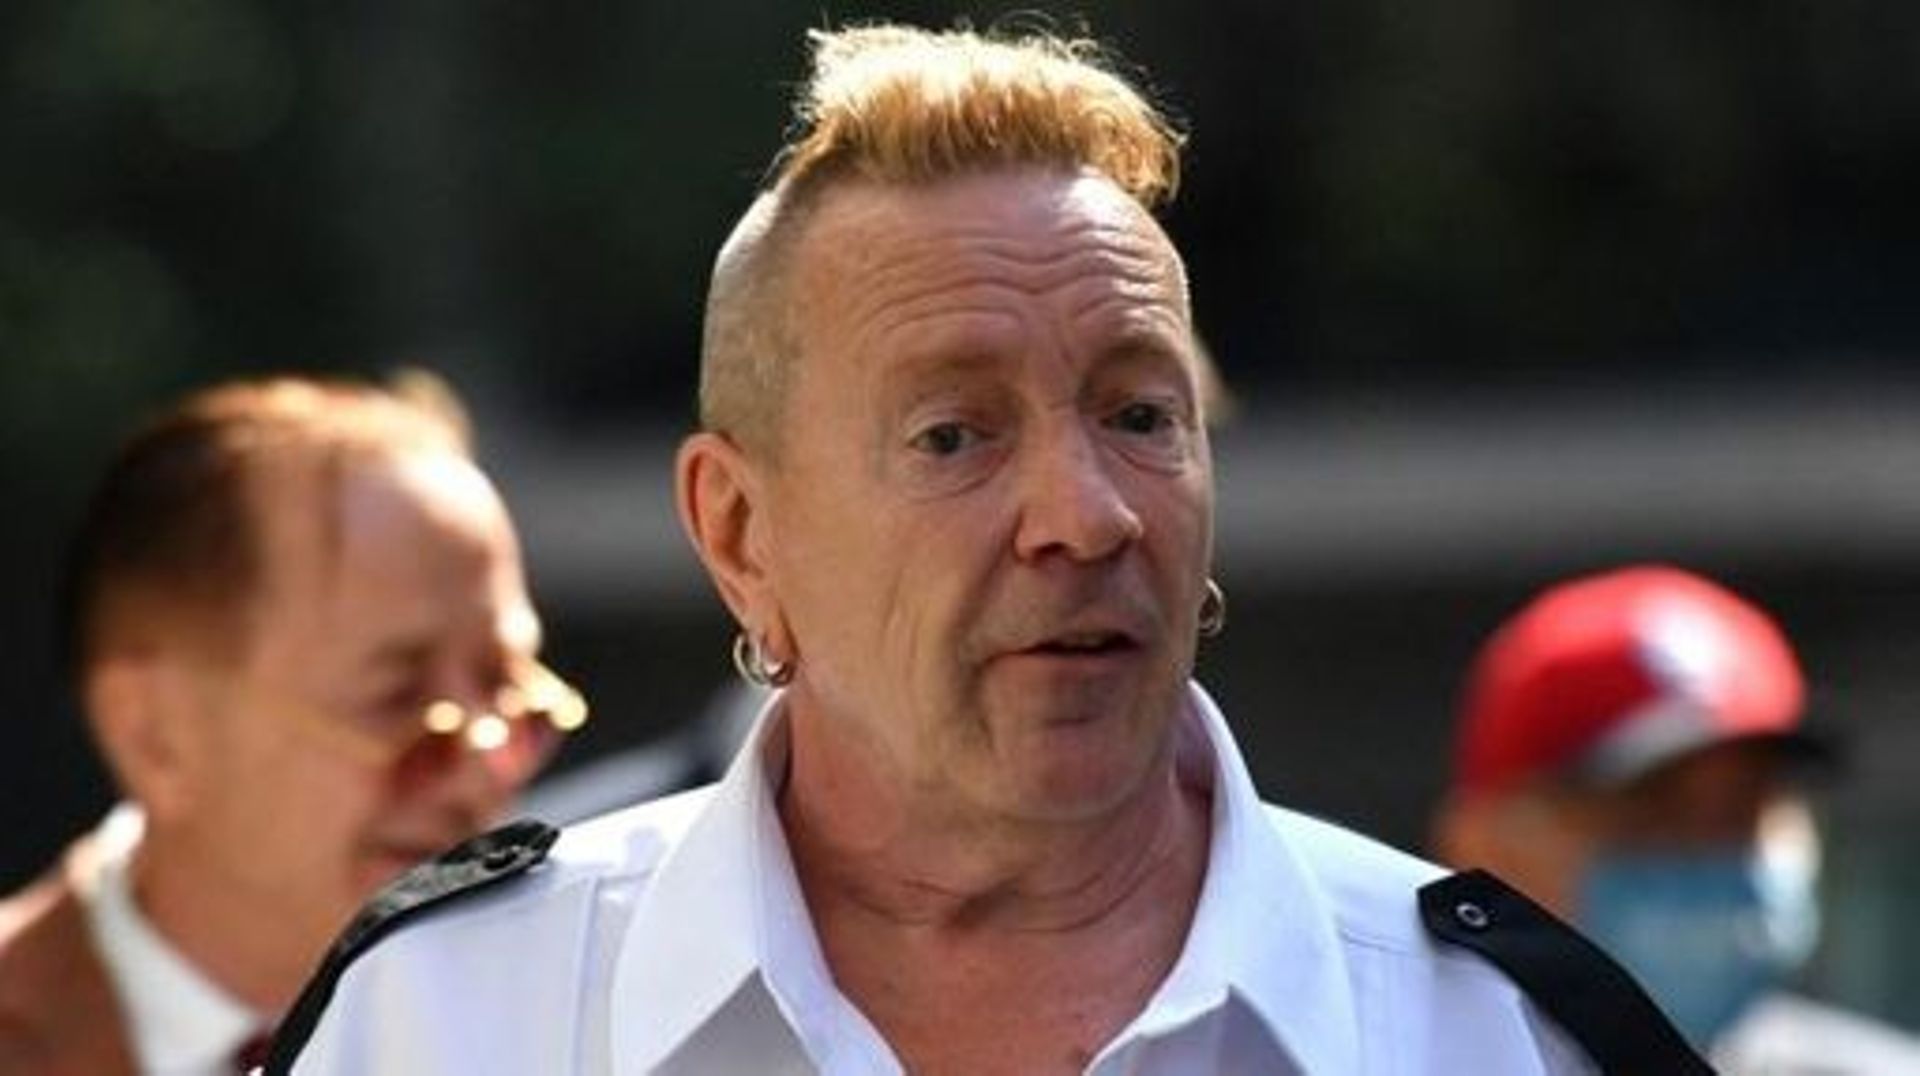 Sex Pistols frontman John Lydon, also known as Johnny Rotten arrives at the Rolls building in central London on July 22, 2021. Lydon is in court to fight two former Sex Pistols band members over the use of their songs in an upcoming television series. JUS